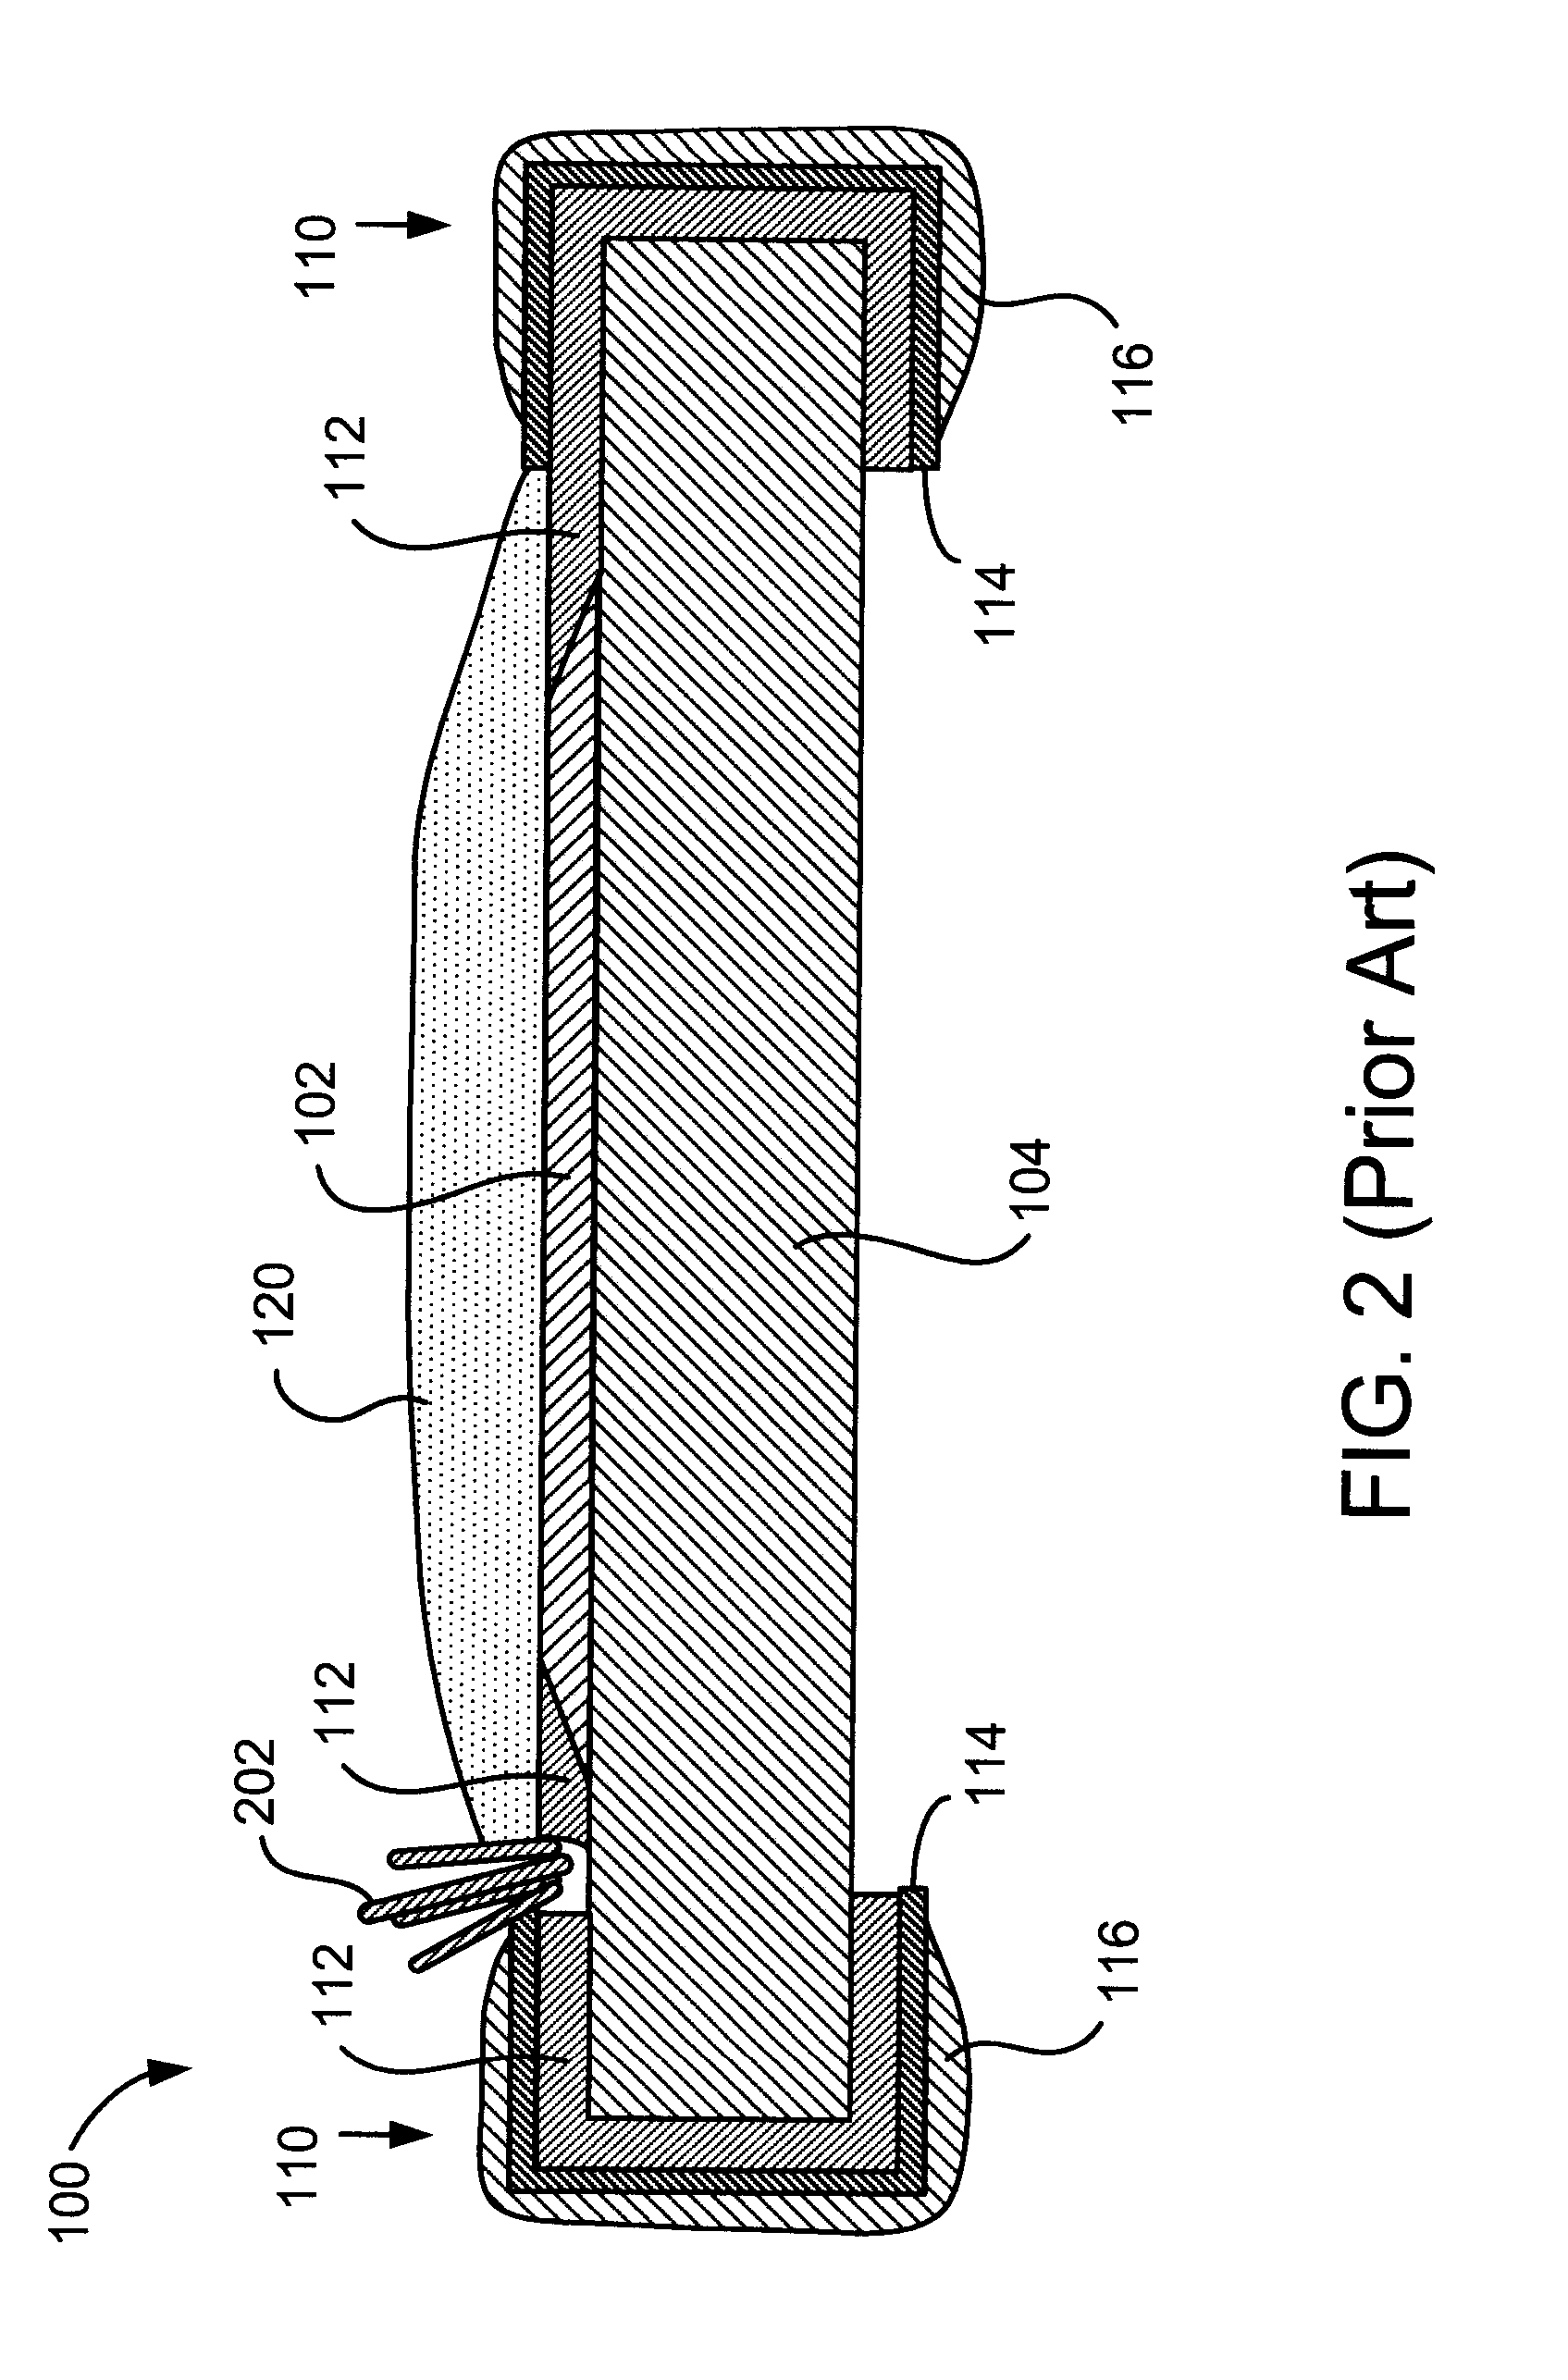 Anti-Corrosion Conformal Coating for Metal Conductors Electrically Connecting an Electronic Component